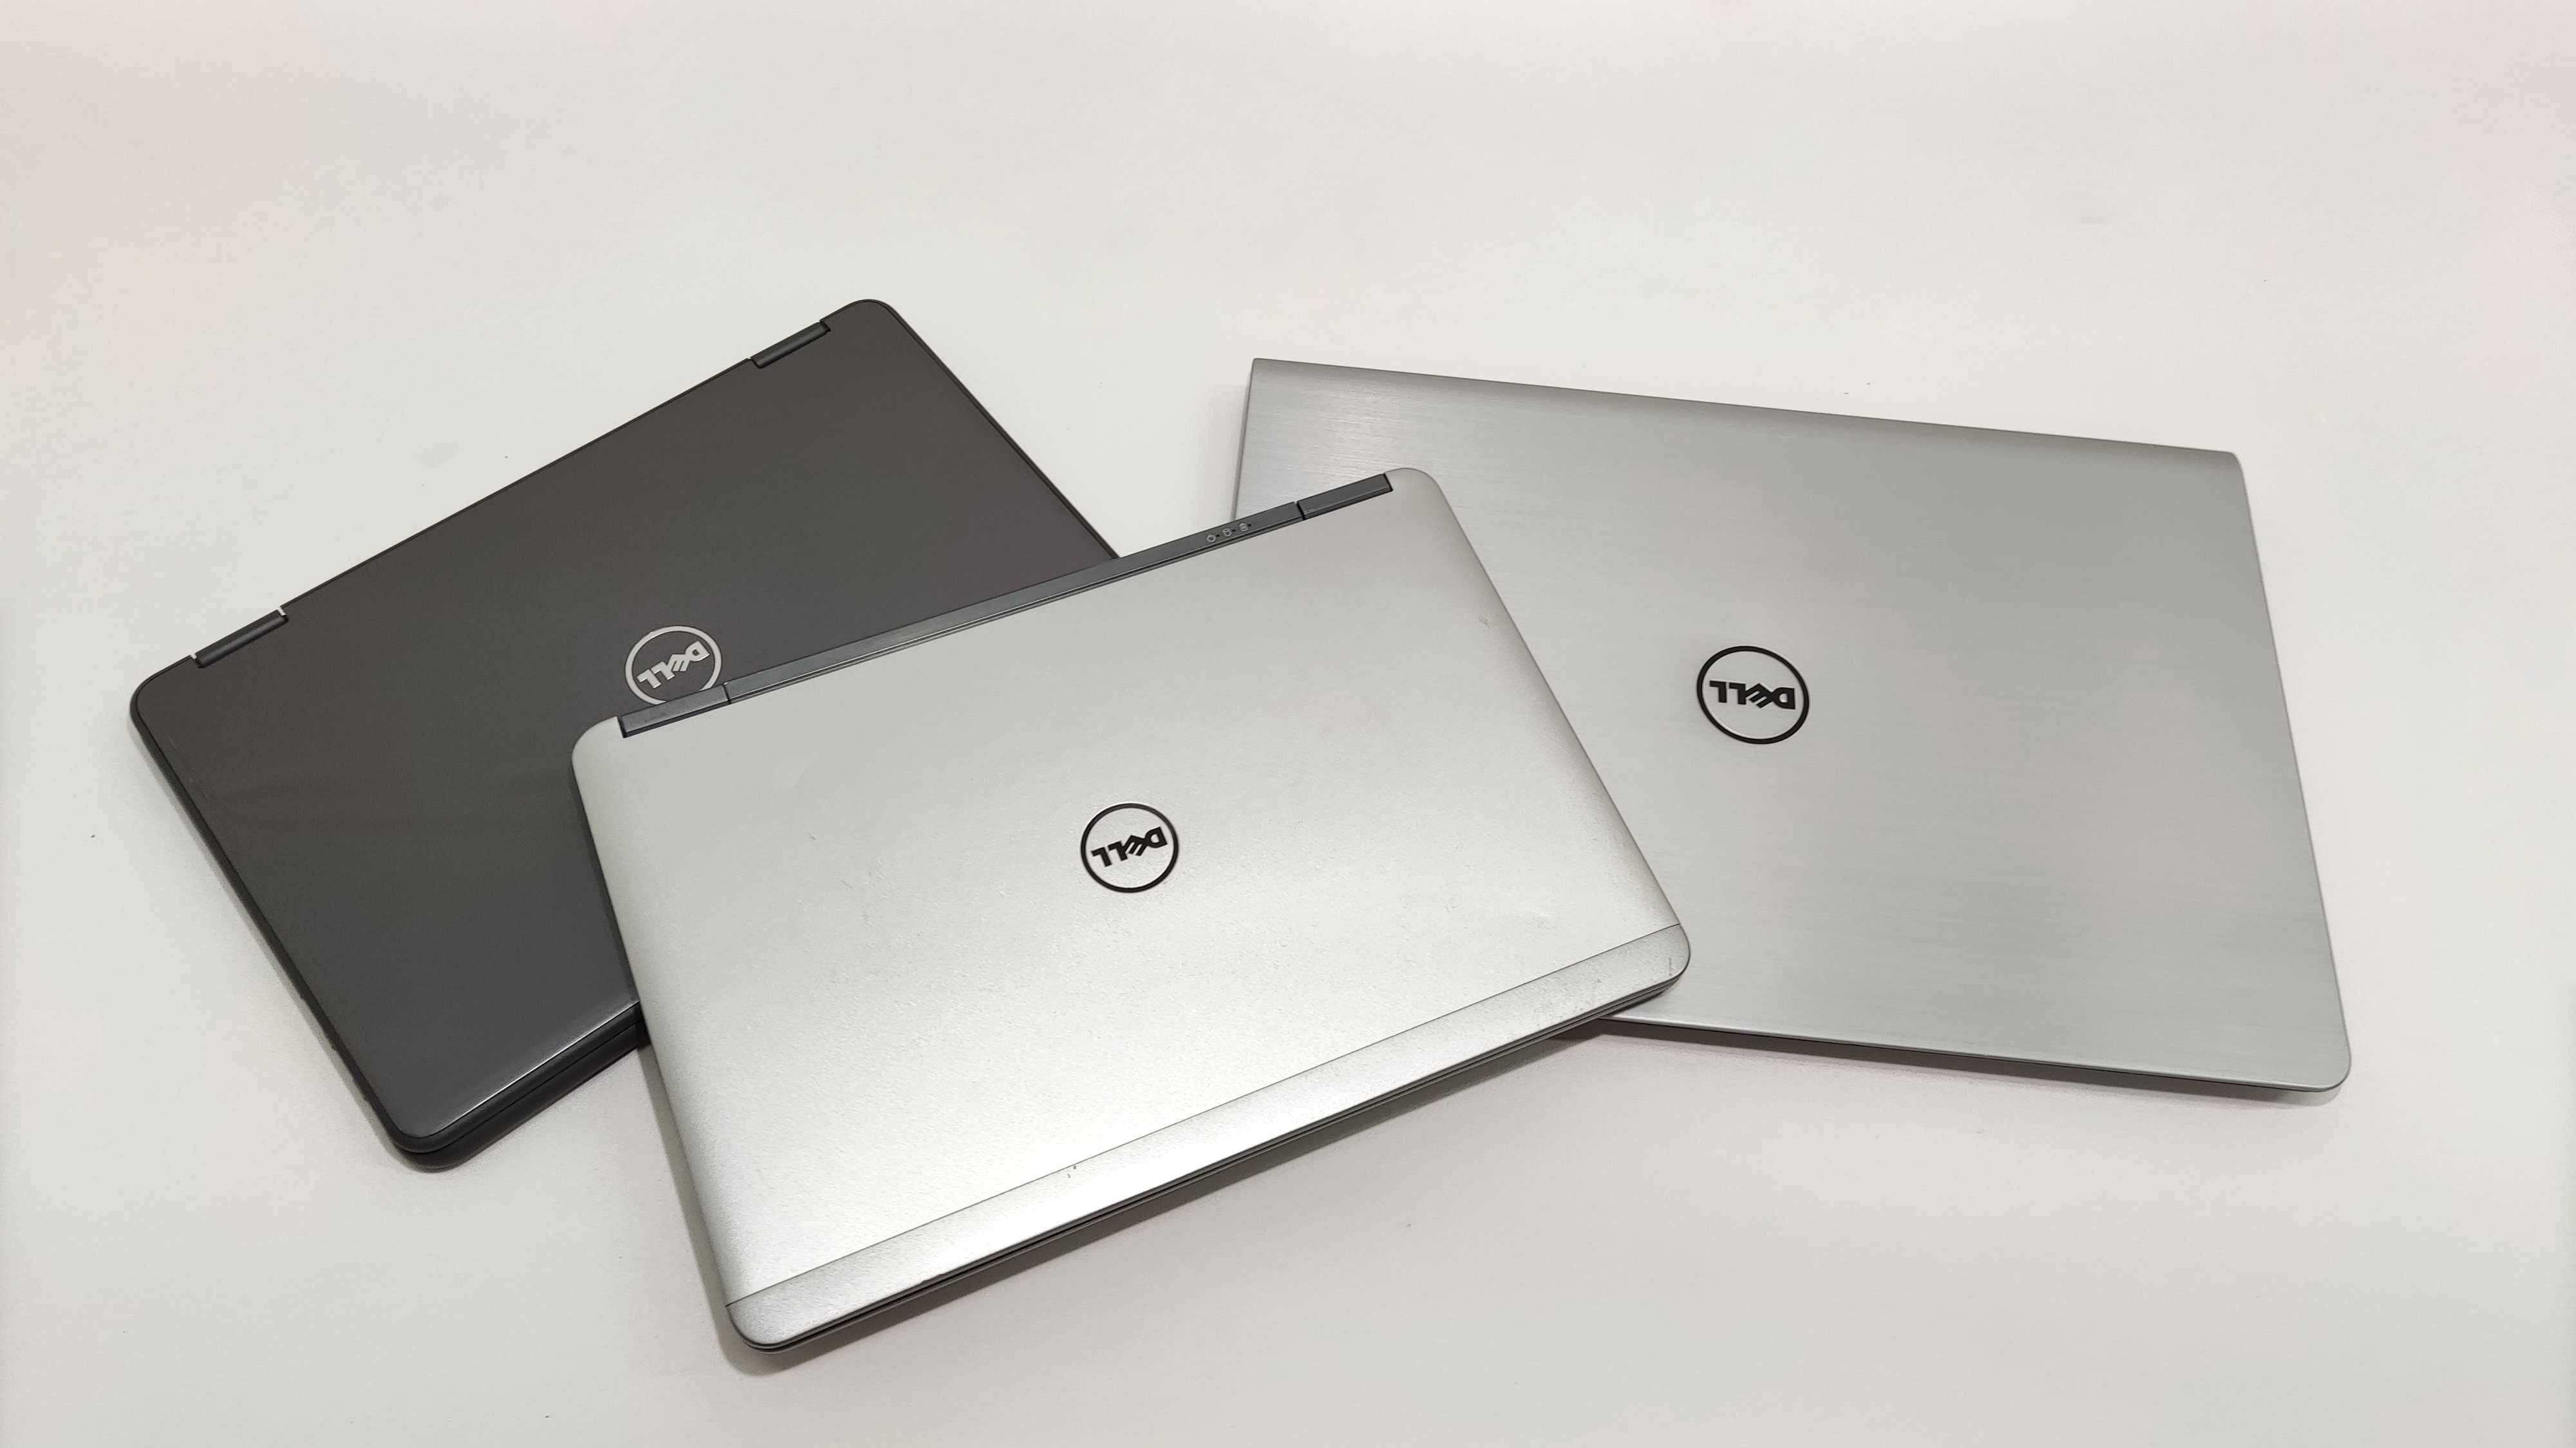 Dell serie bussines, Latitude, touch-screen, i5 ssd full hd ips